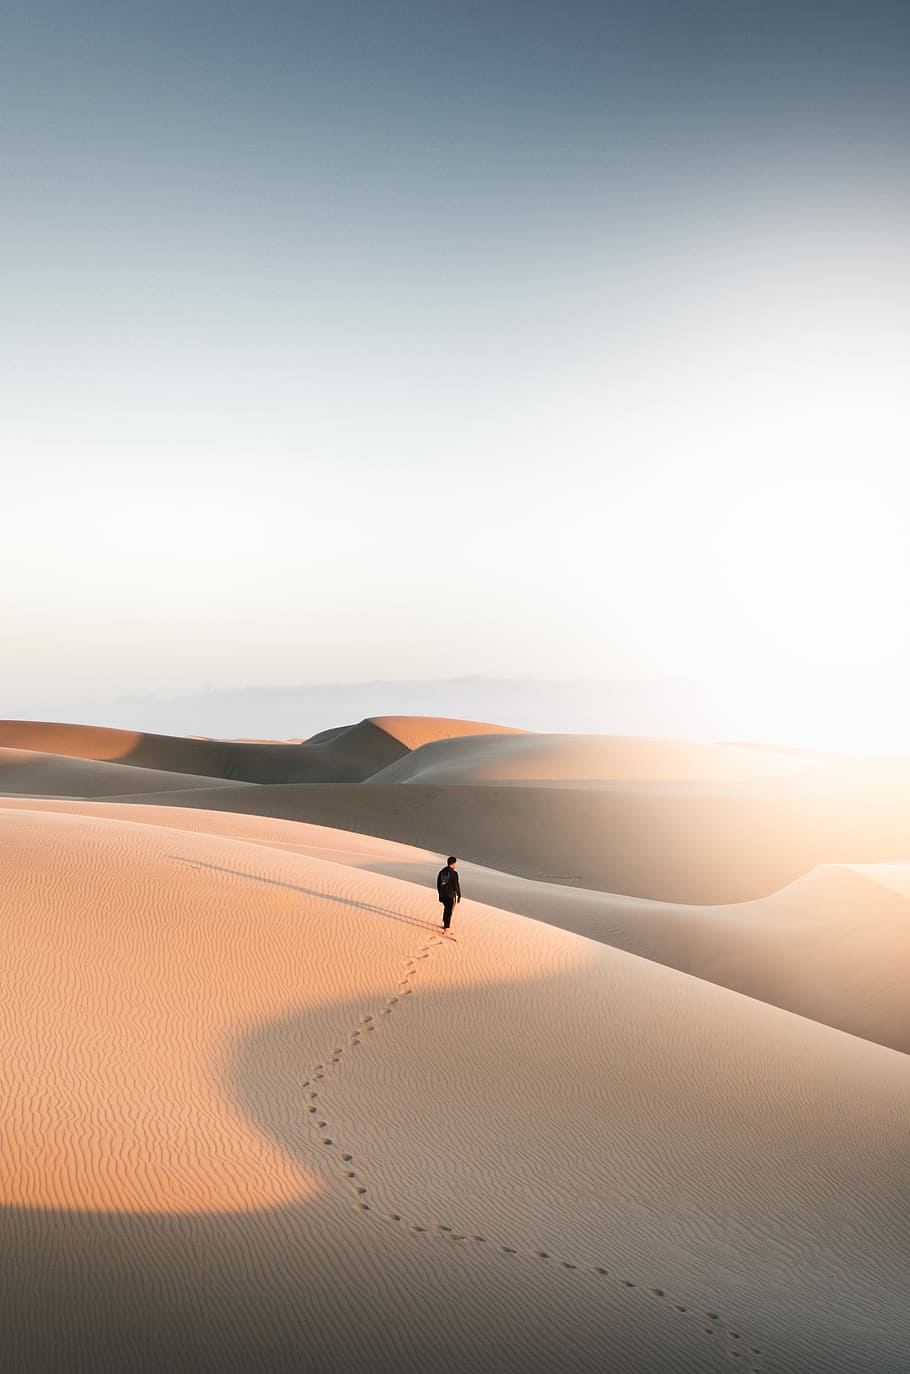 HD wallpaper: person walking on desert, man standing in the middle